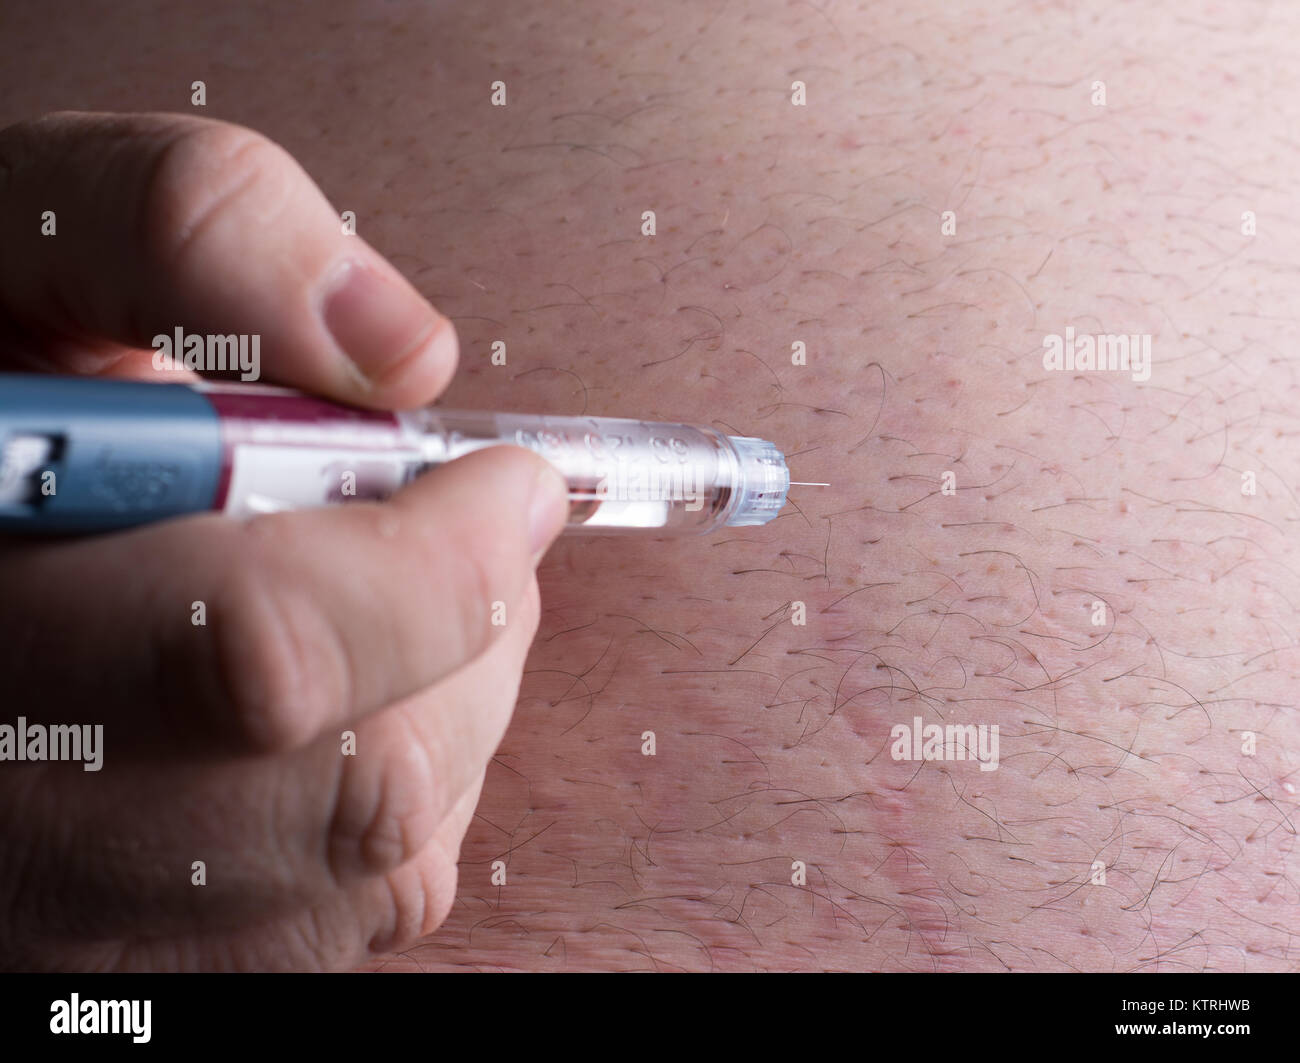 insulin being administered via an insulin pen into large mans stomach. Stock Photo